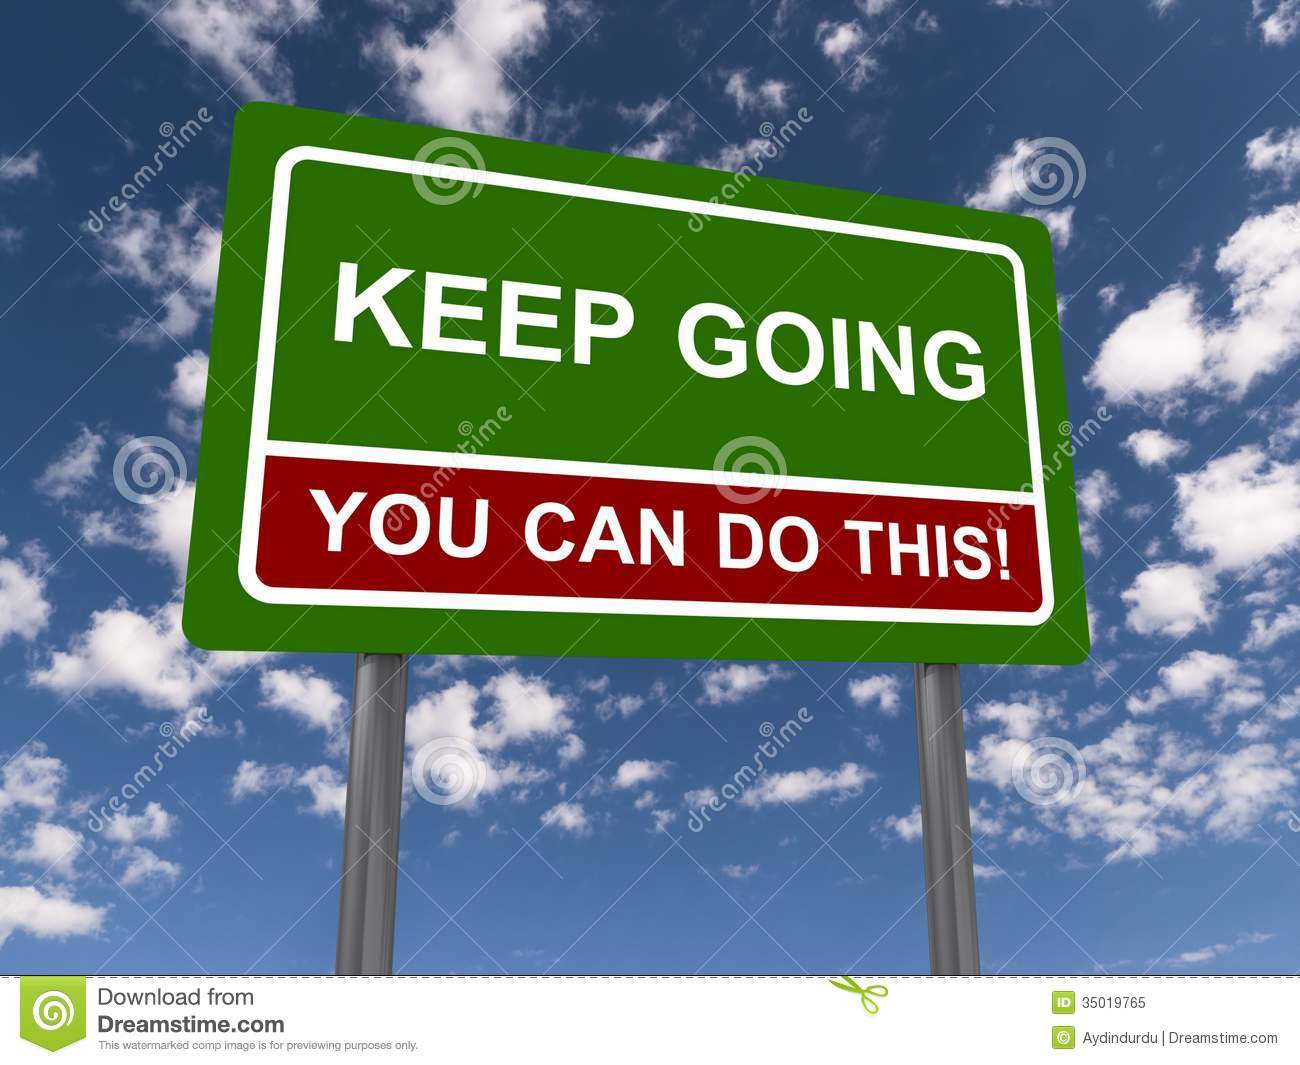 Keep Going You Can Do This Royalty Free Stock Photo   Image  35019765